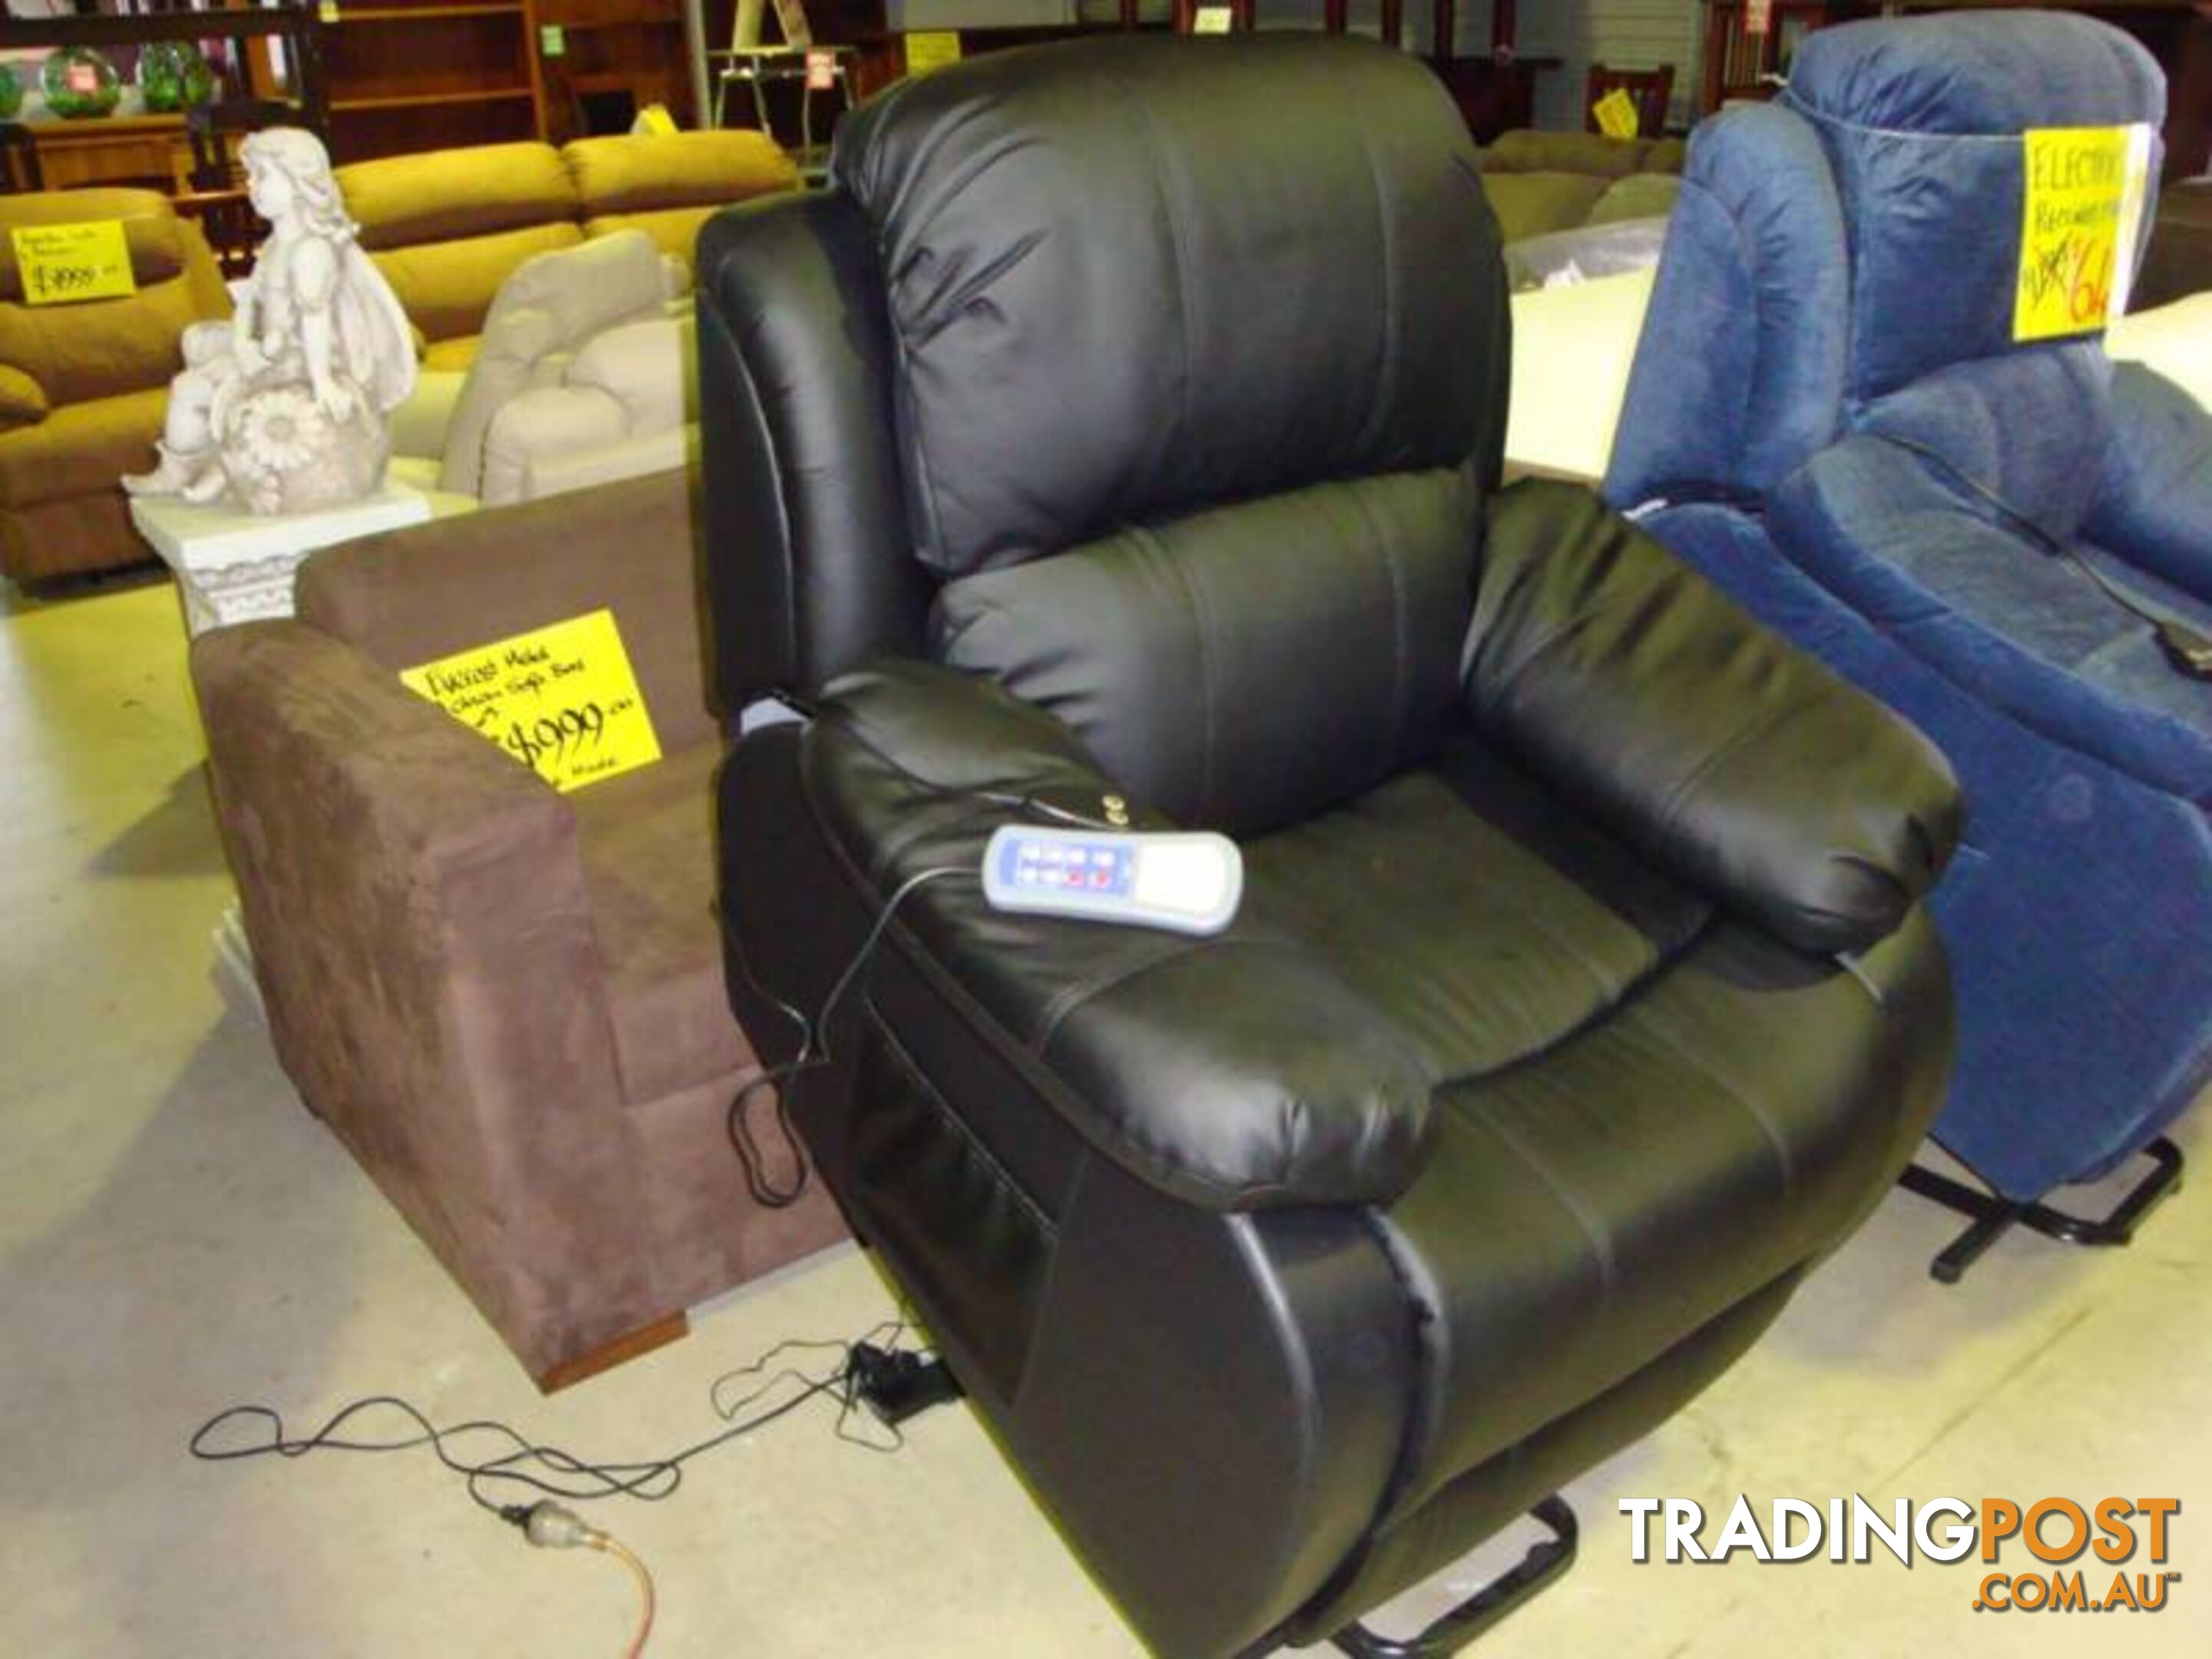 NEW ELECTRIC LIFT CHAIR REMOTE. MASSAGE AND HEAT. RENT $10.60PW